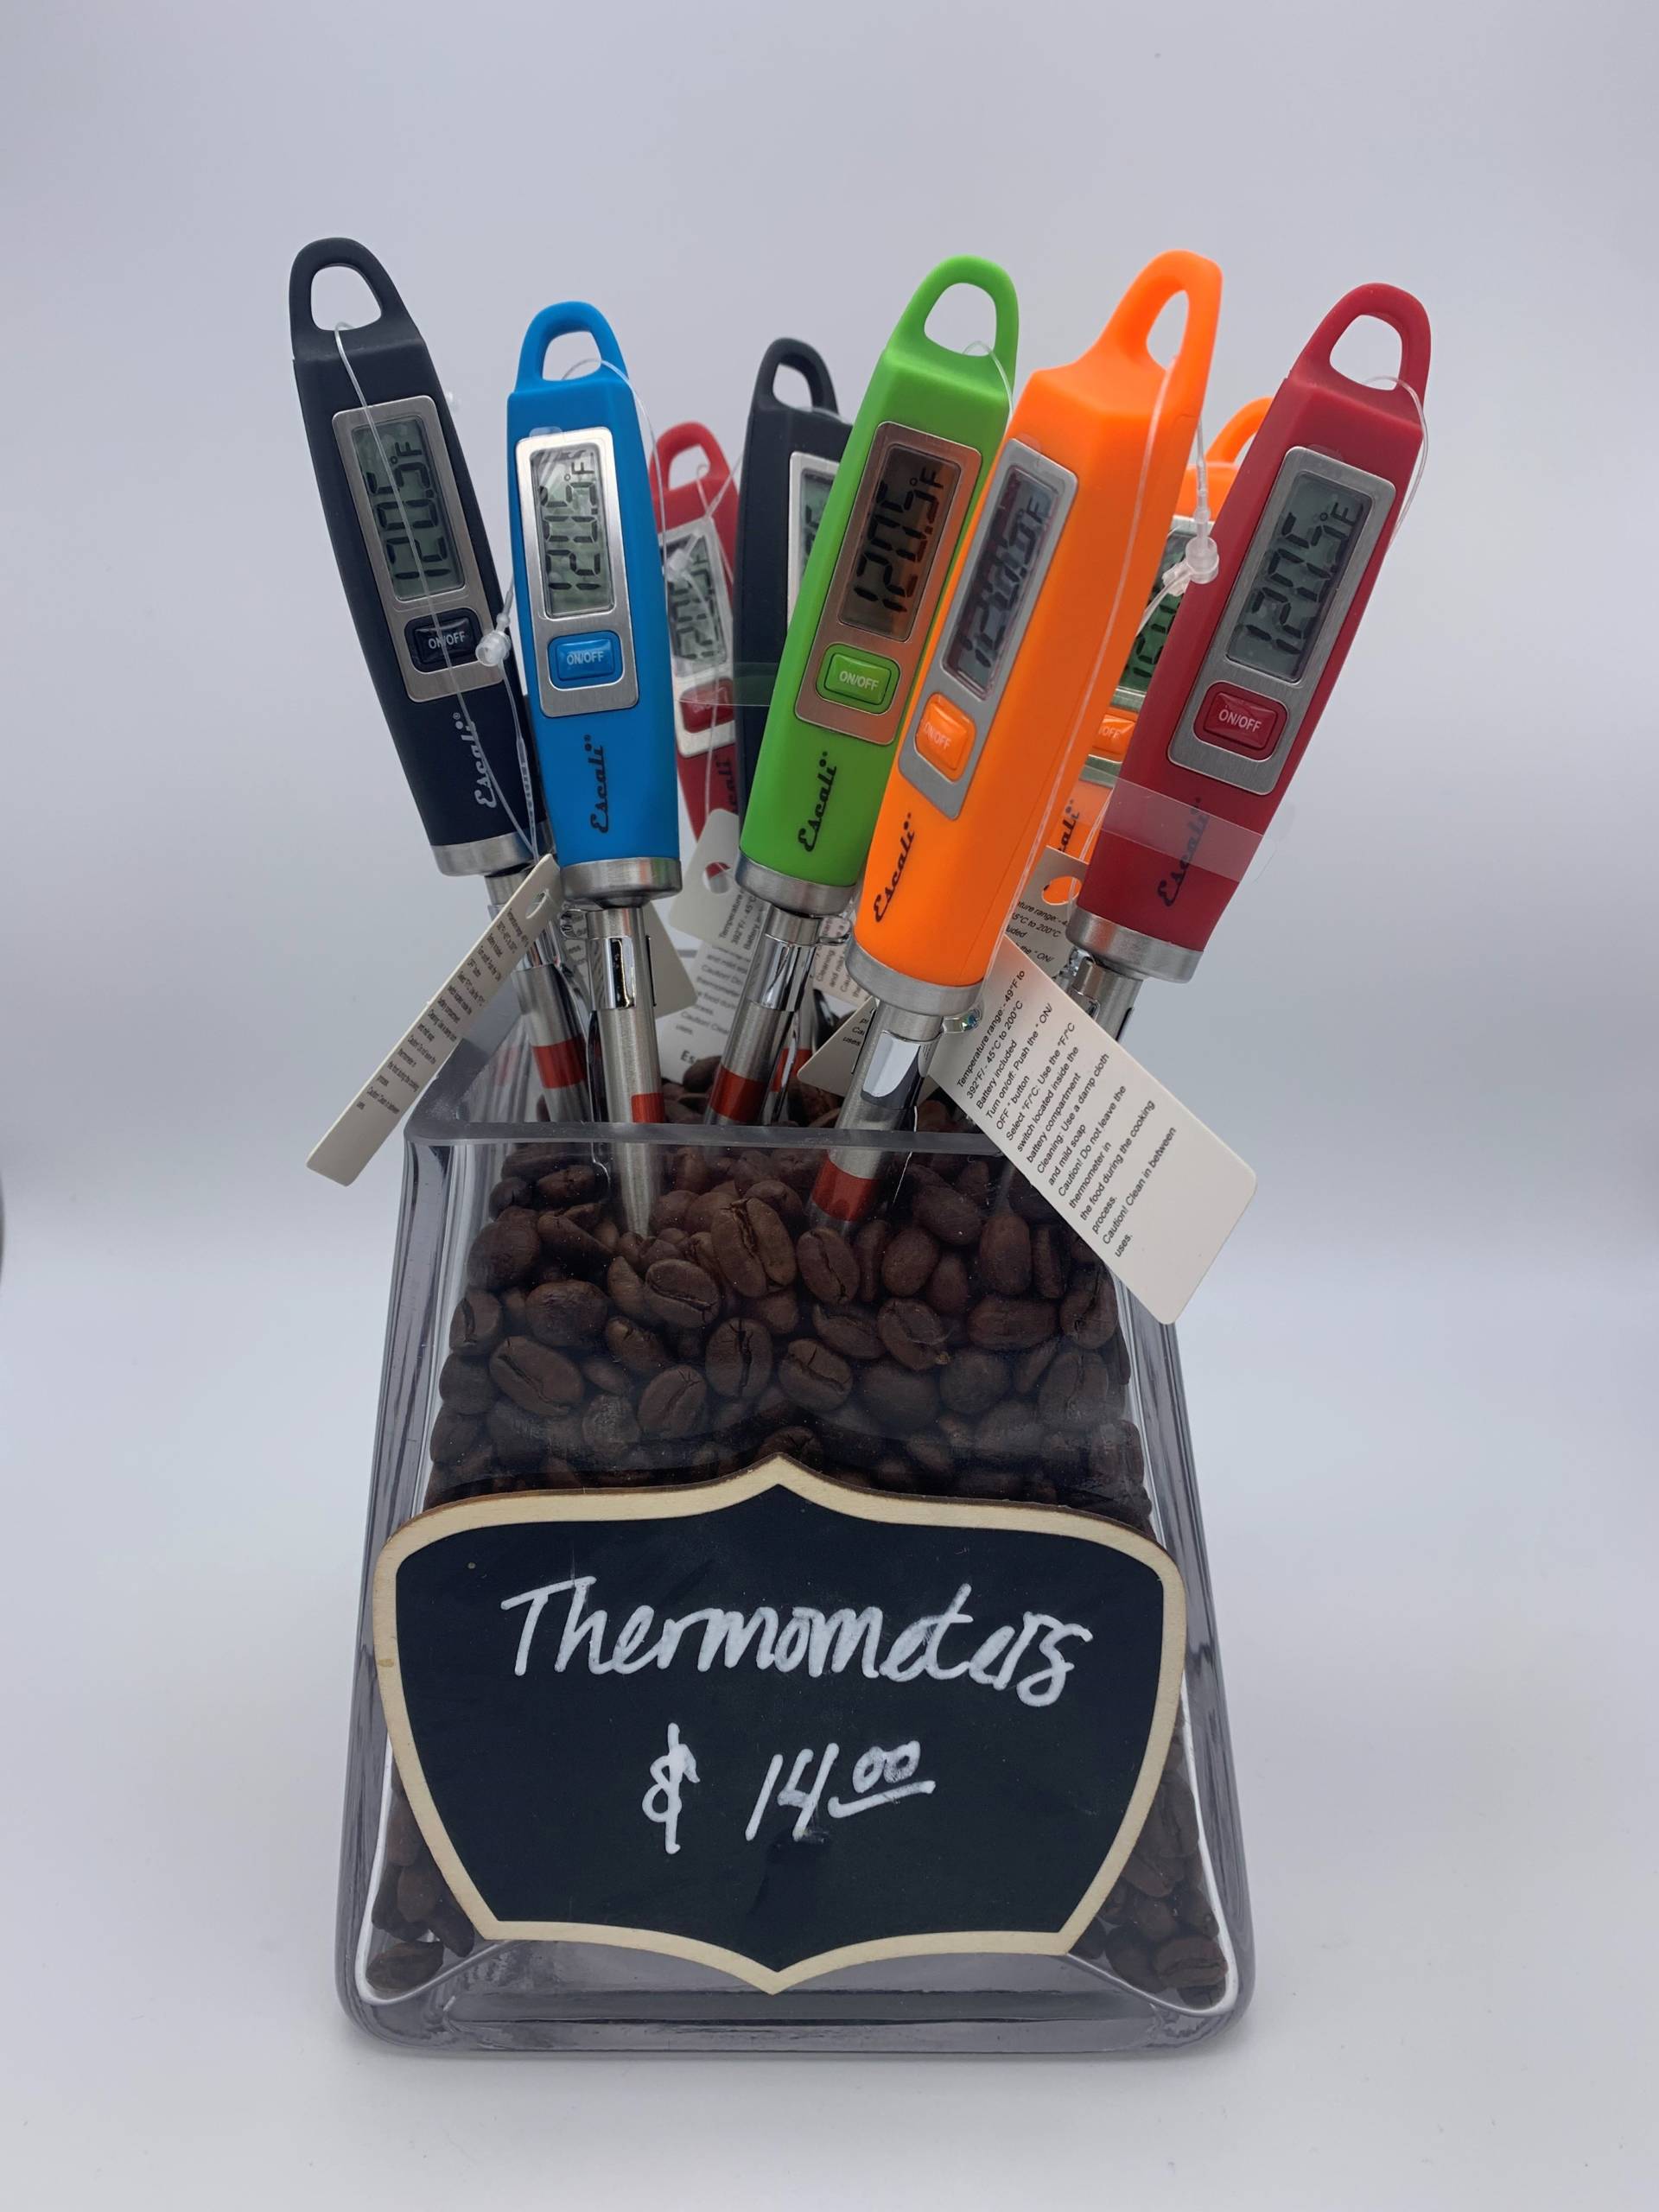 https://libertydelightfarms.com/wp-content/uploads/2021/01/Thermometer-scaled.jpg